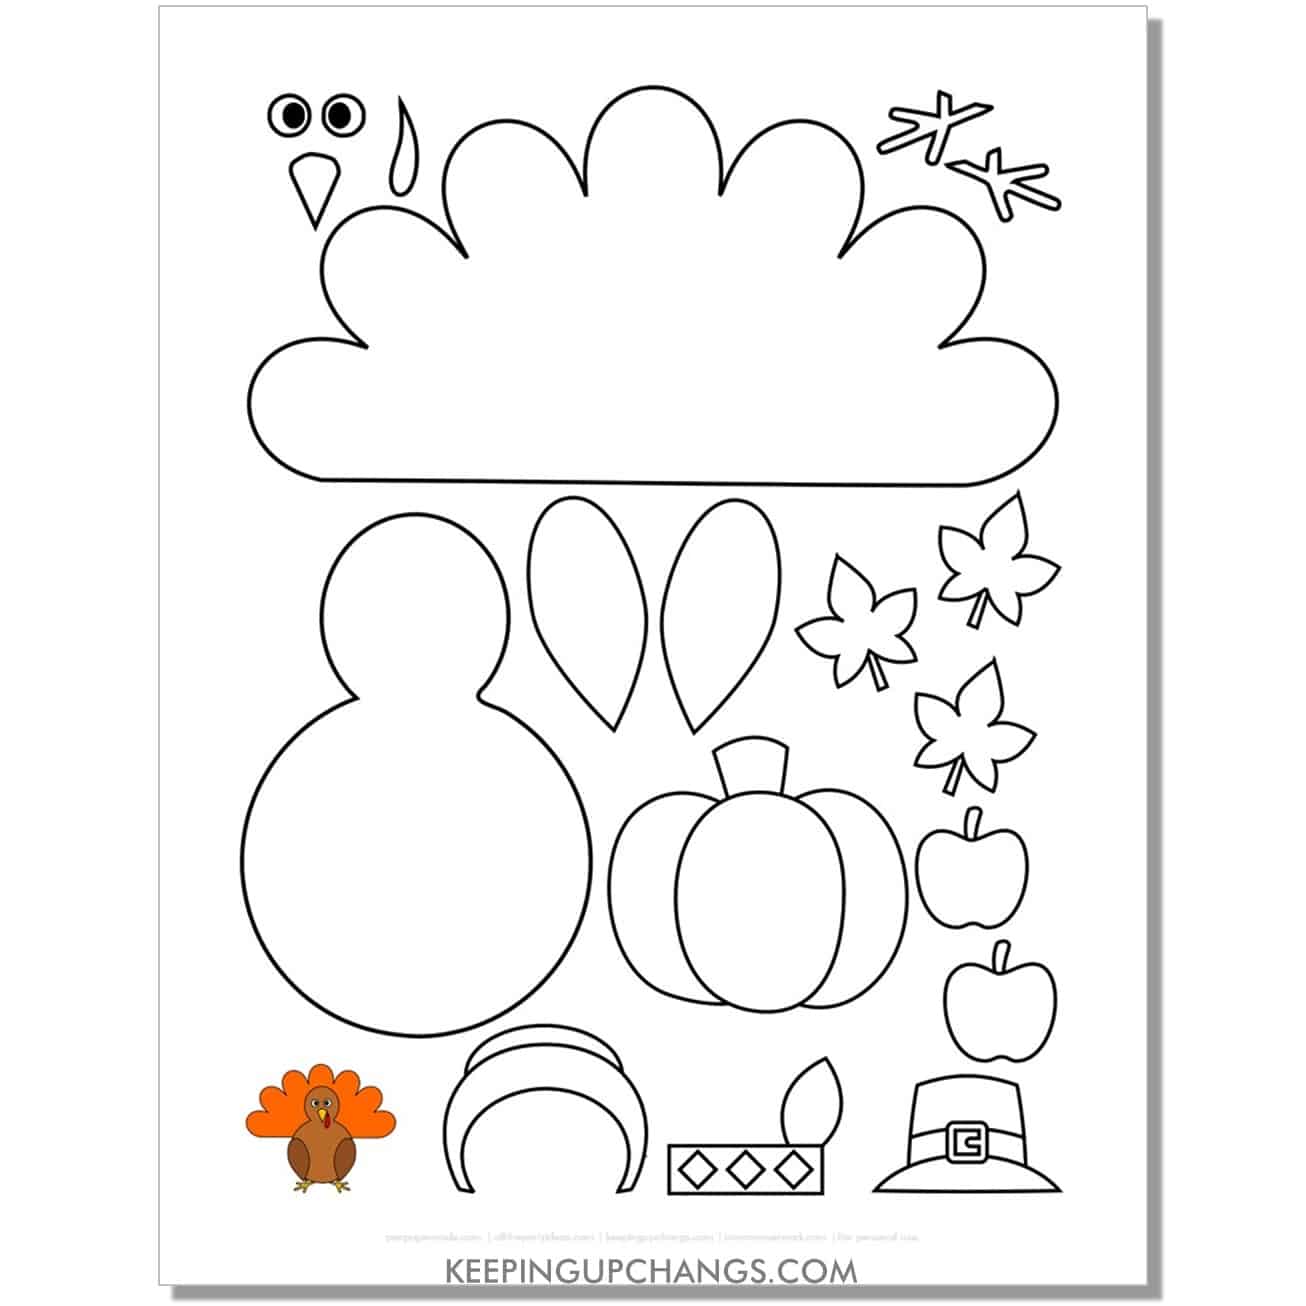 easy build a turkey template for preschool with feathers, body, hat, accessories in black, white.